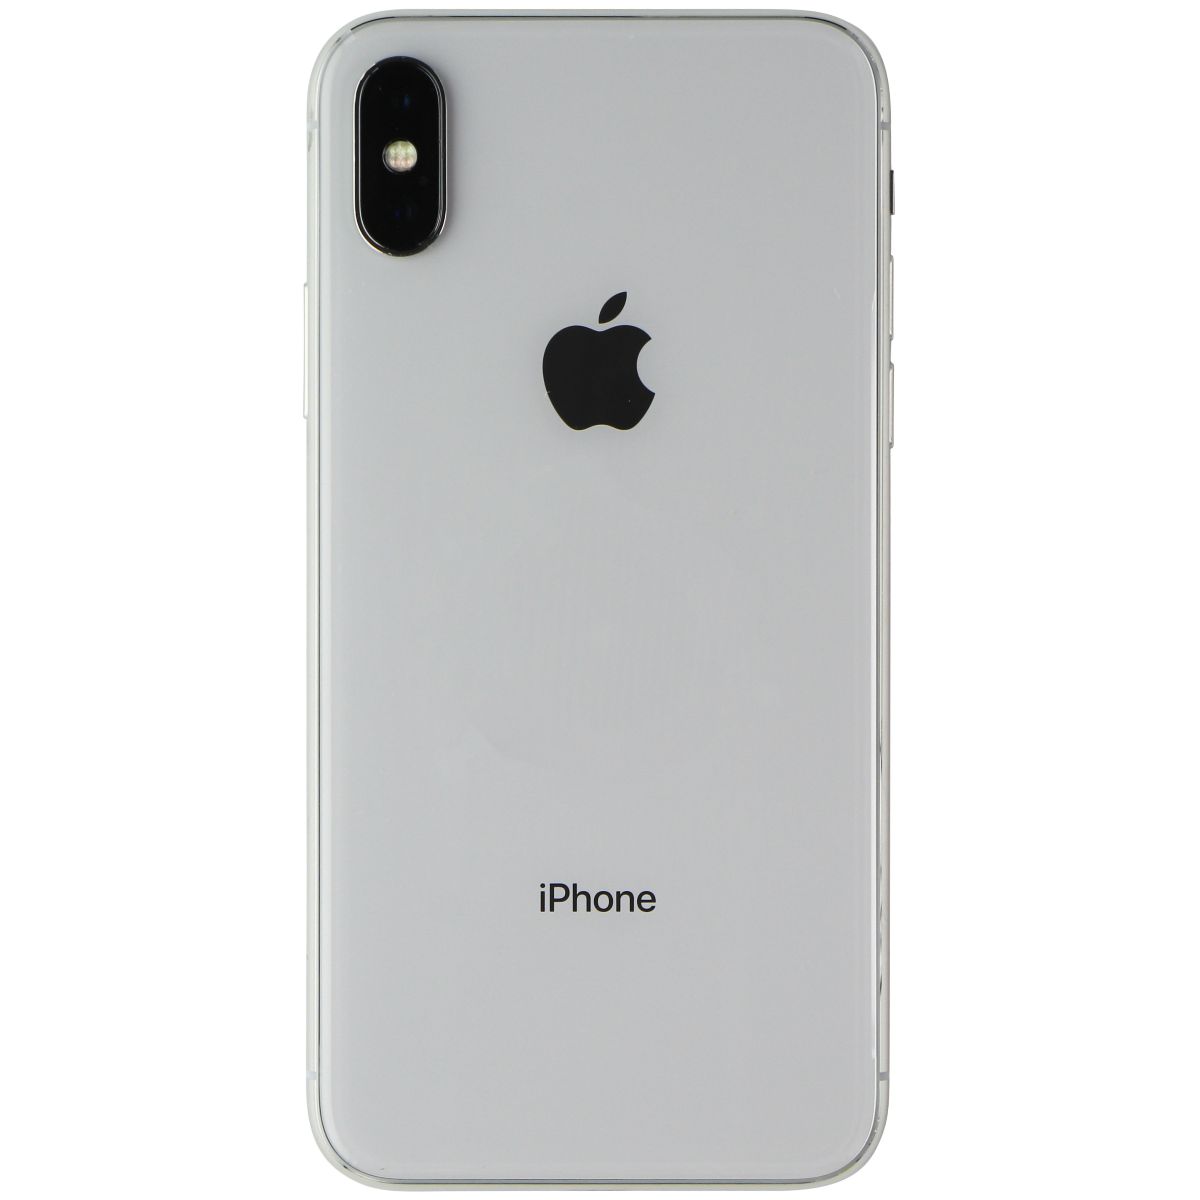 Apple iPhone X (5.8-inch) (A1865) Unlocked - 64GB / Silver - Bad Face ID* Cell Phones & Smartphones Apple    - Simple Cell Bulk Wholesale Pricing - USA Seller